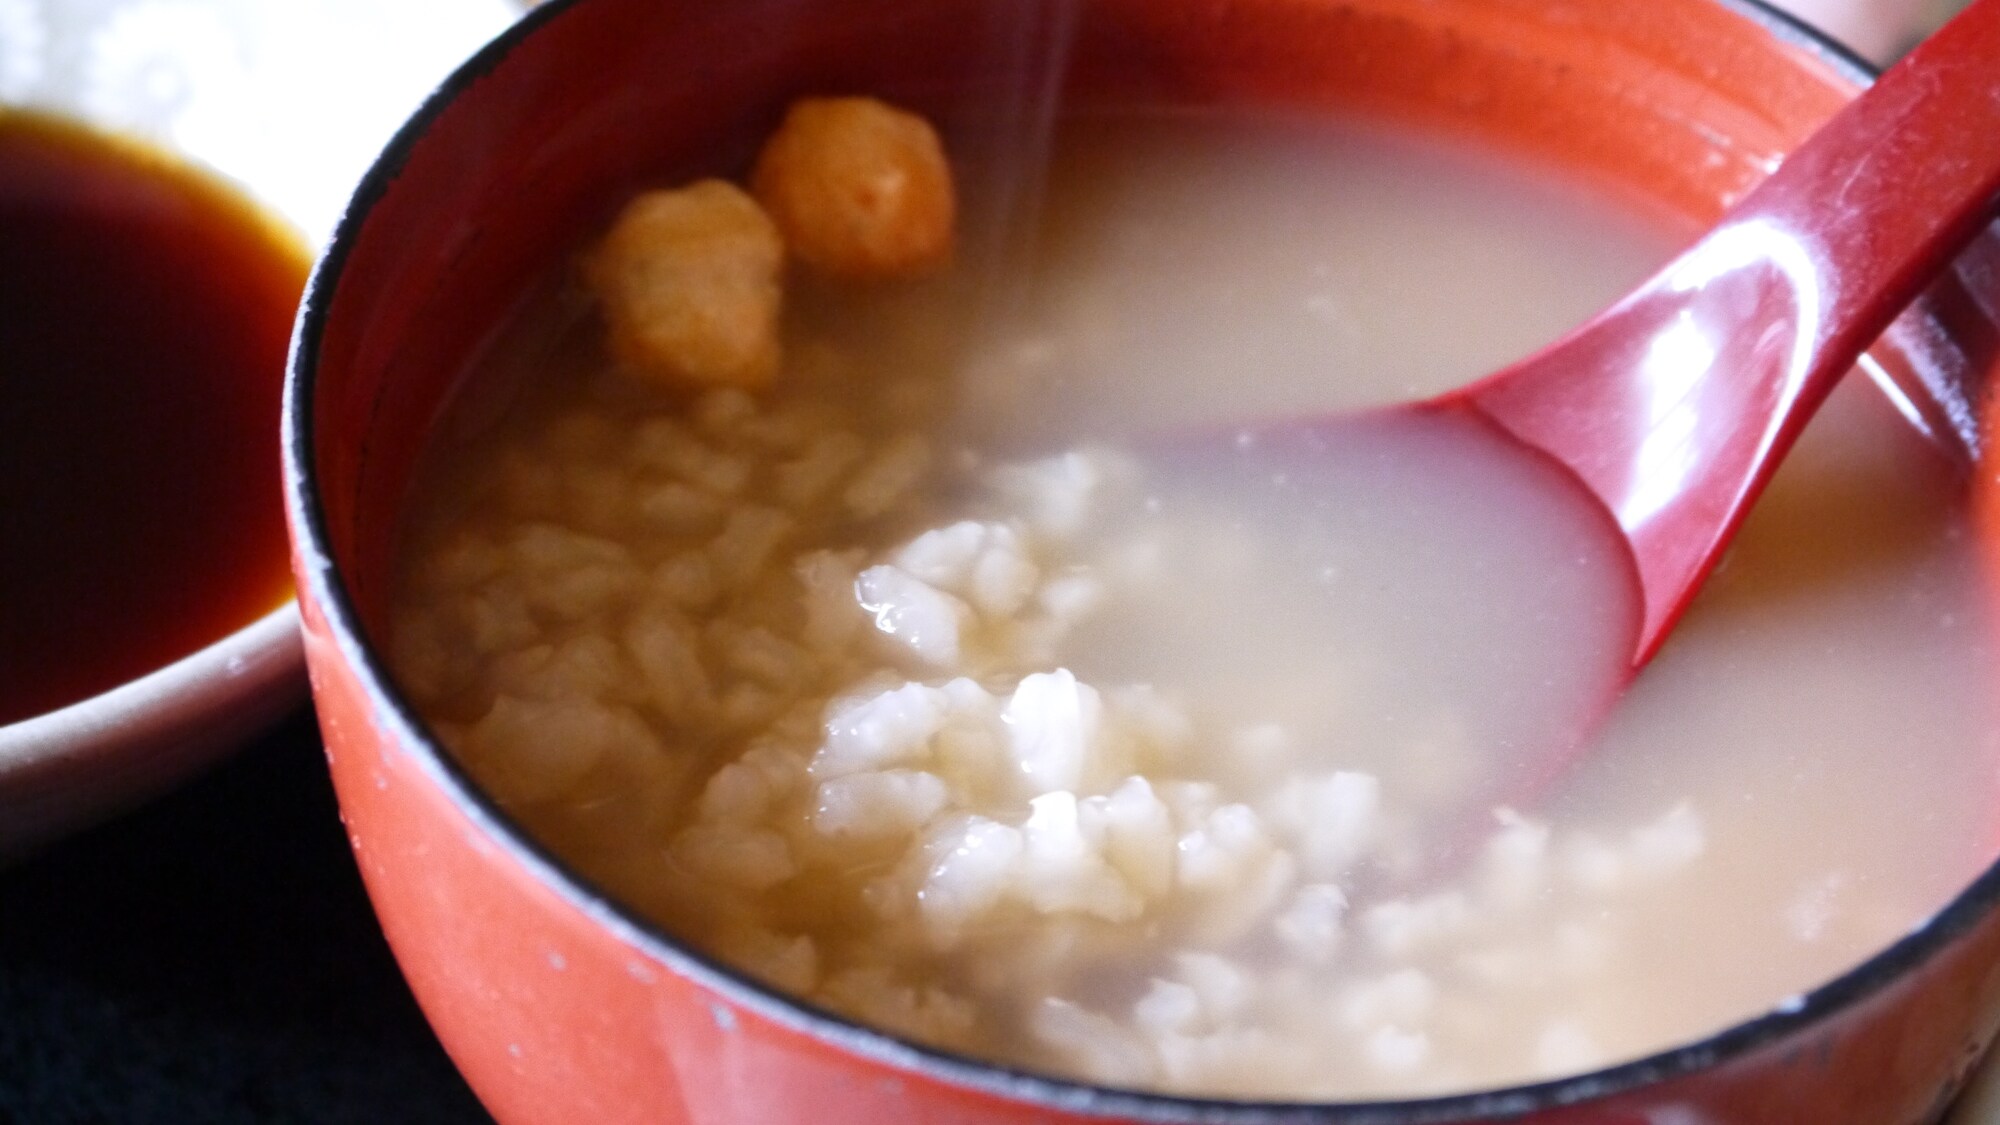 * [Japanese breakfast] We will serve Nara's specialty tea porridge and Narazuke, which are fragrant with roasted green tea.